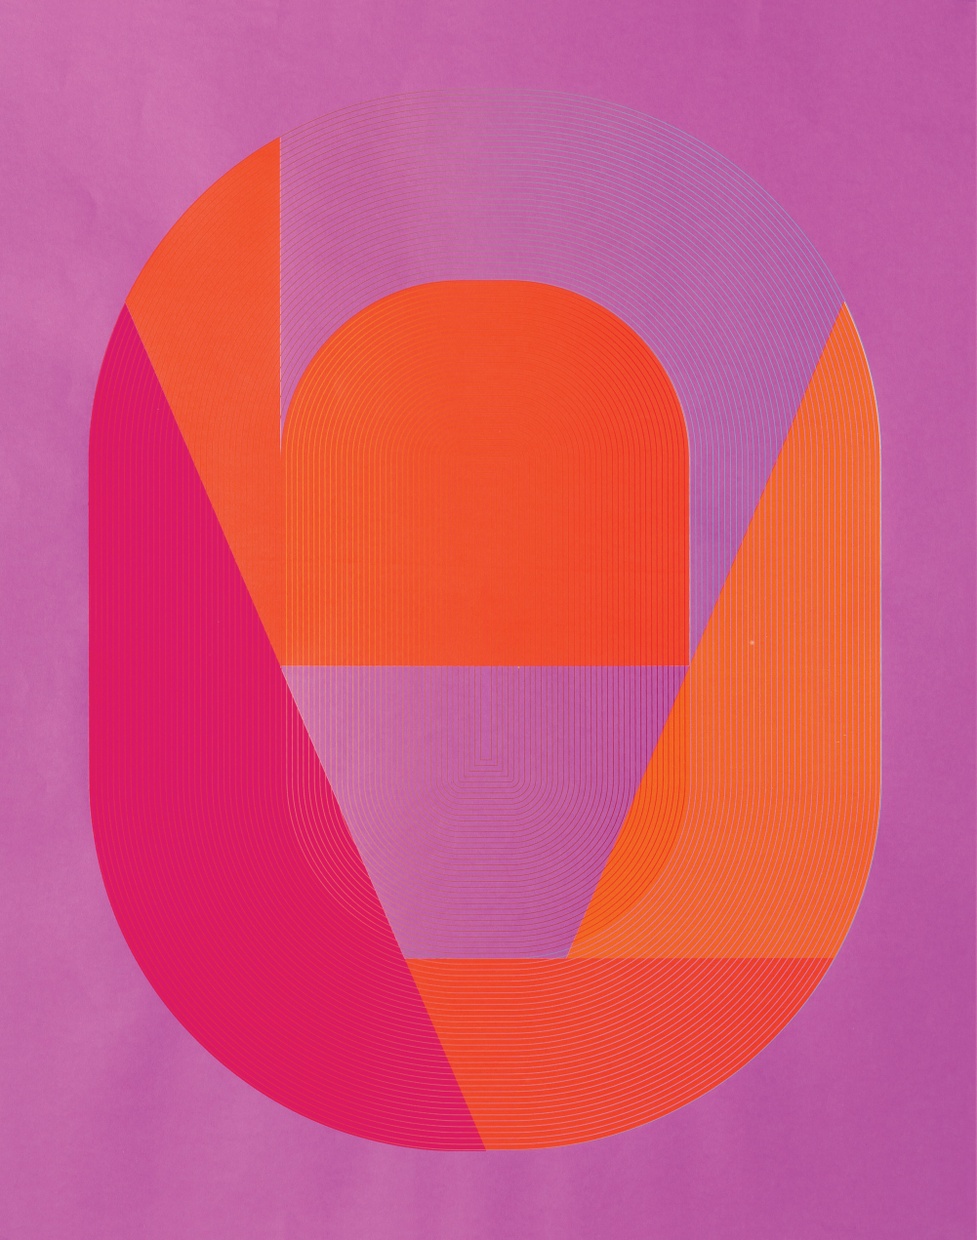 An artwork with a solid magenta background and various rounded arch and triangle shapes in shades of orange and pink congregated at the center.